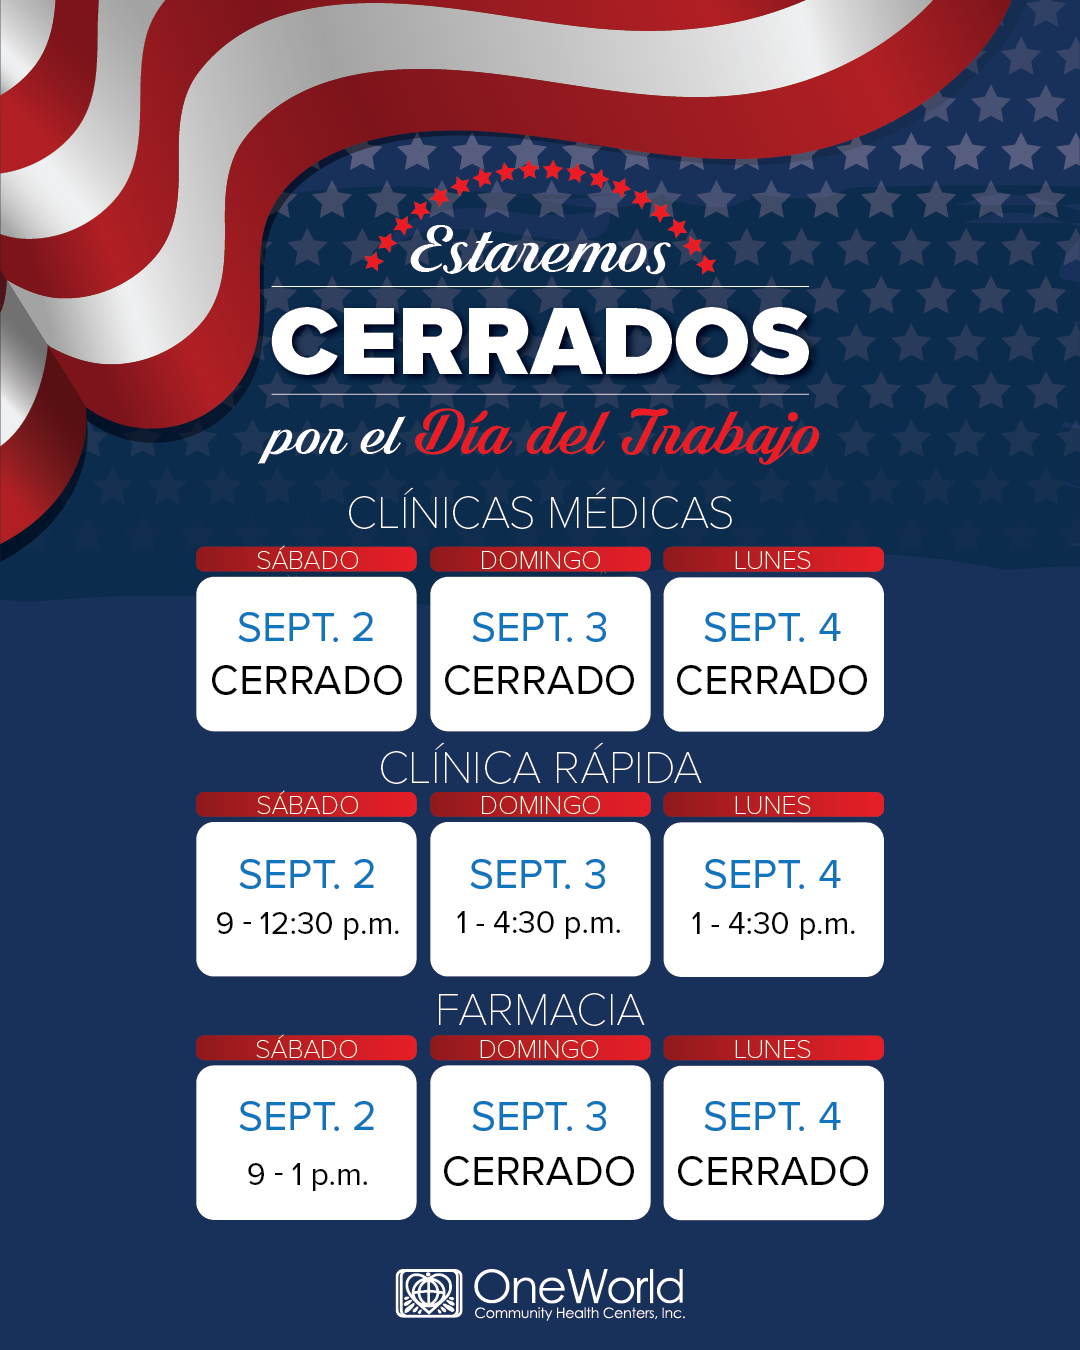 Image of Labor Day closing notice schedule in Spanish